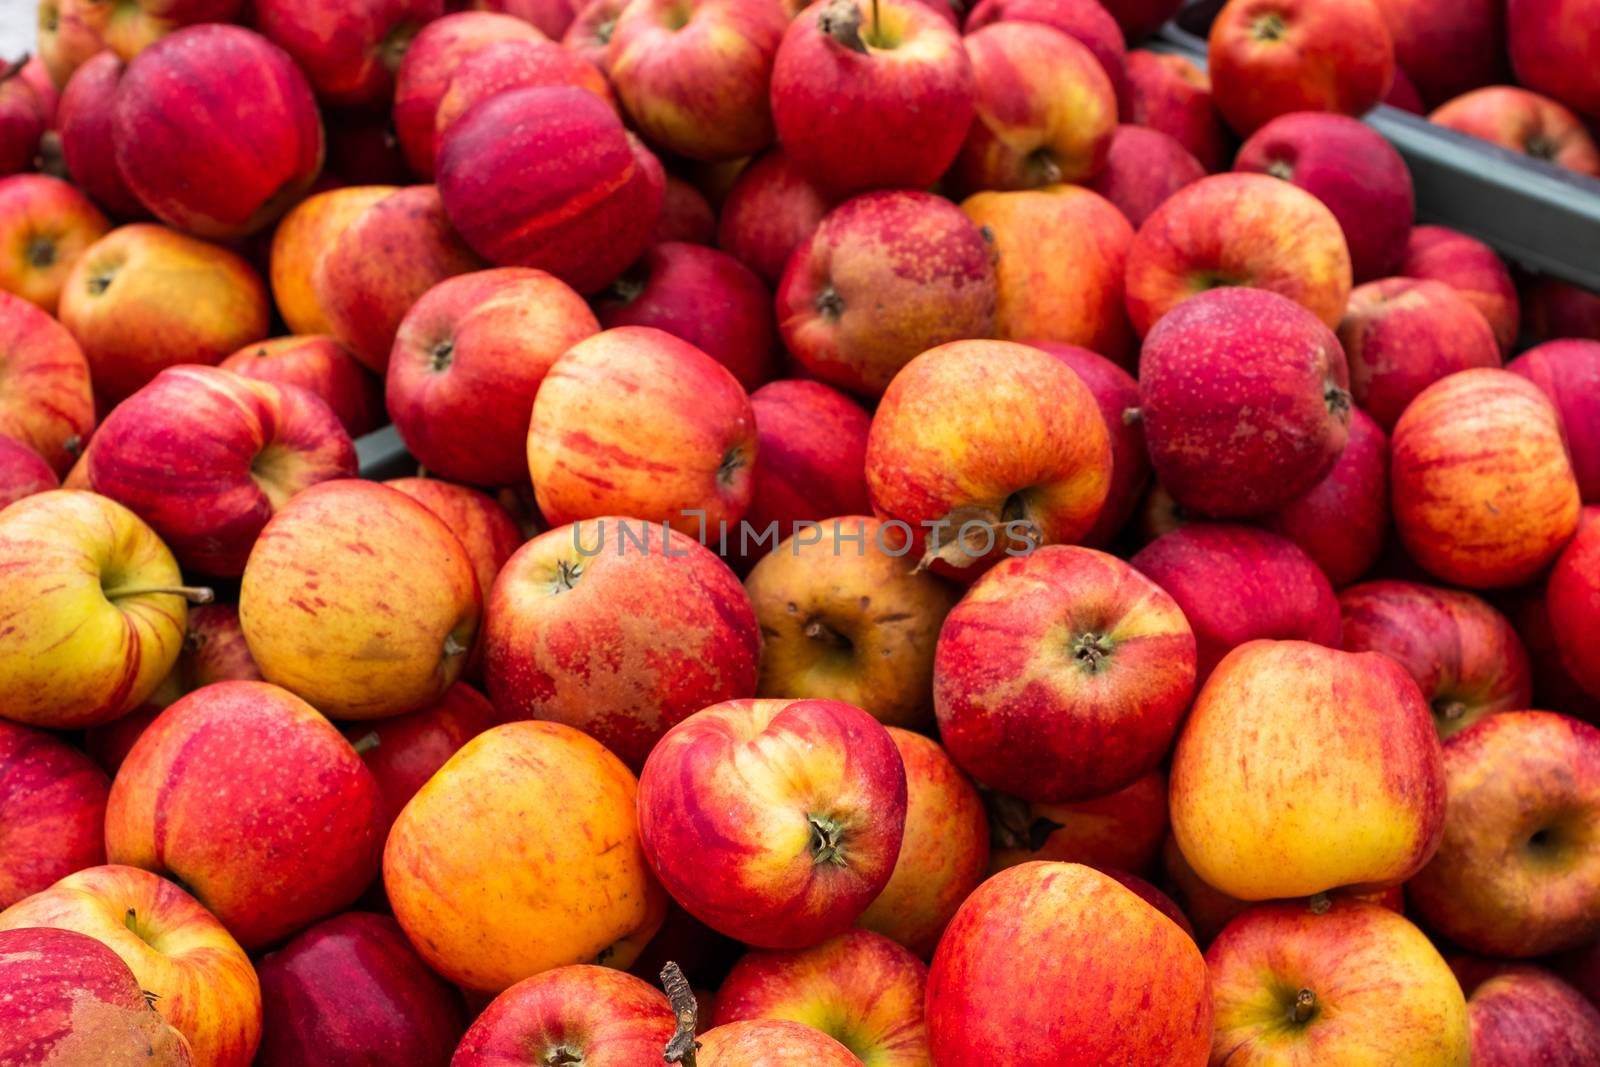 Colorful apples in an open market by gonzalobell